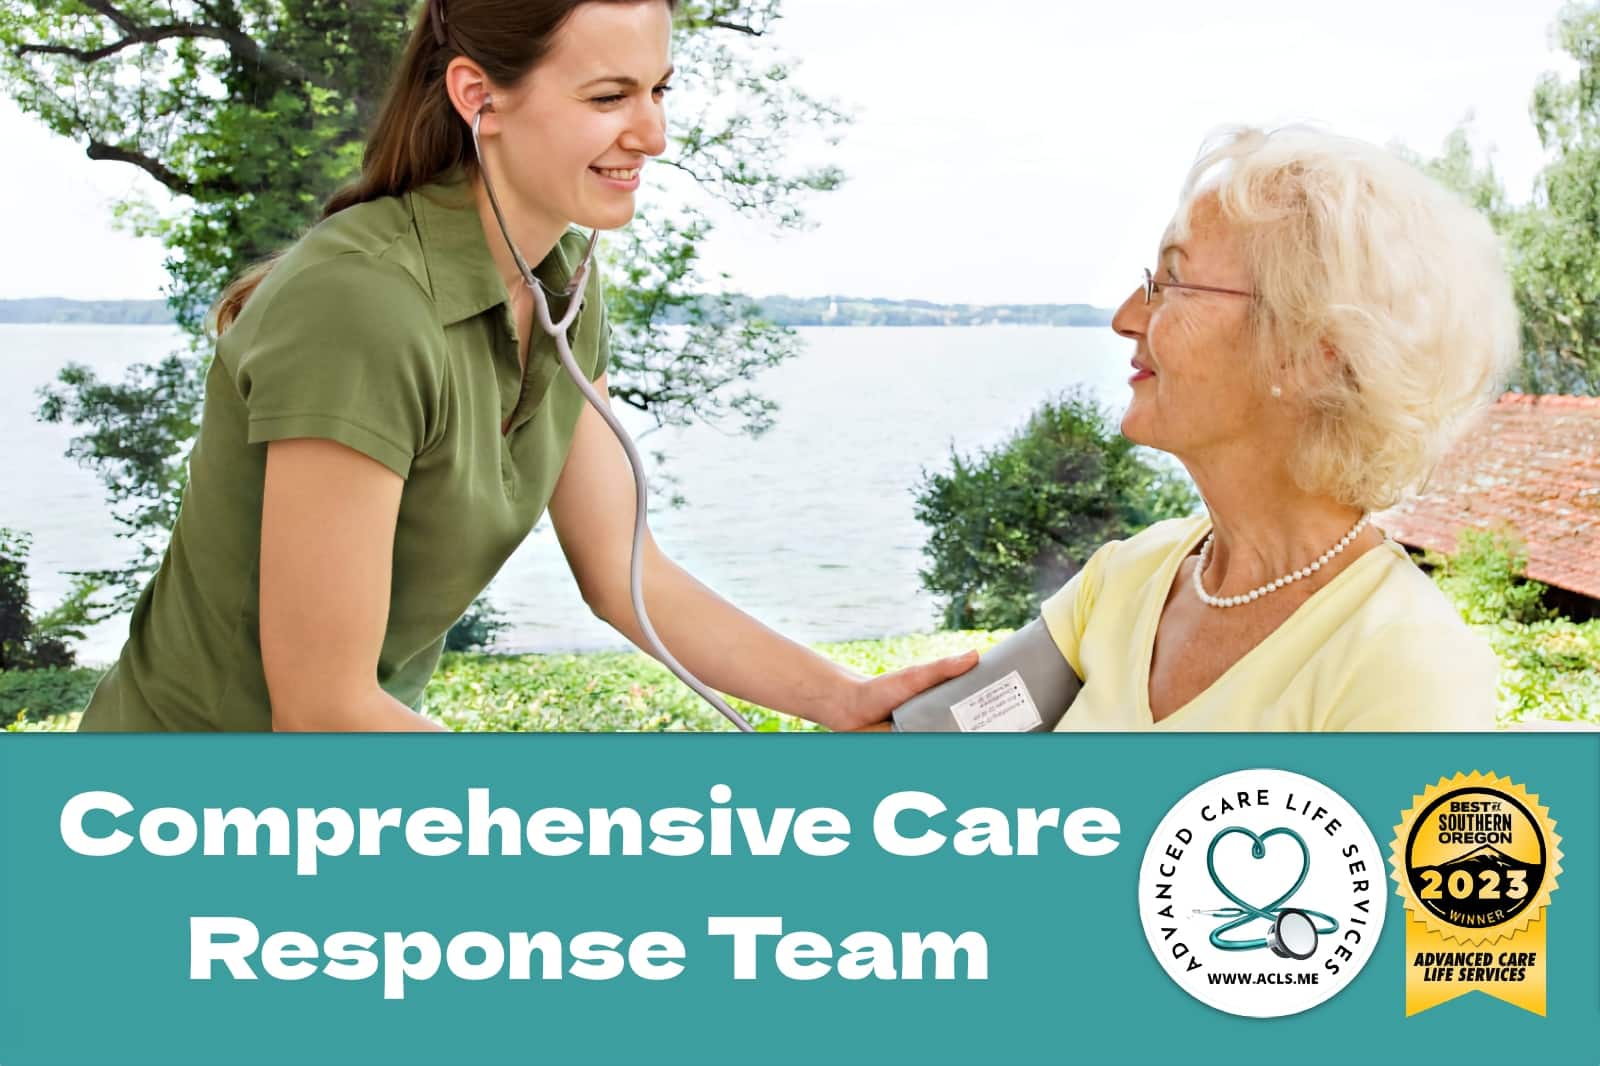 Introducing our Comprehensive Care Response Team